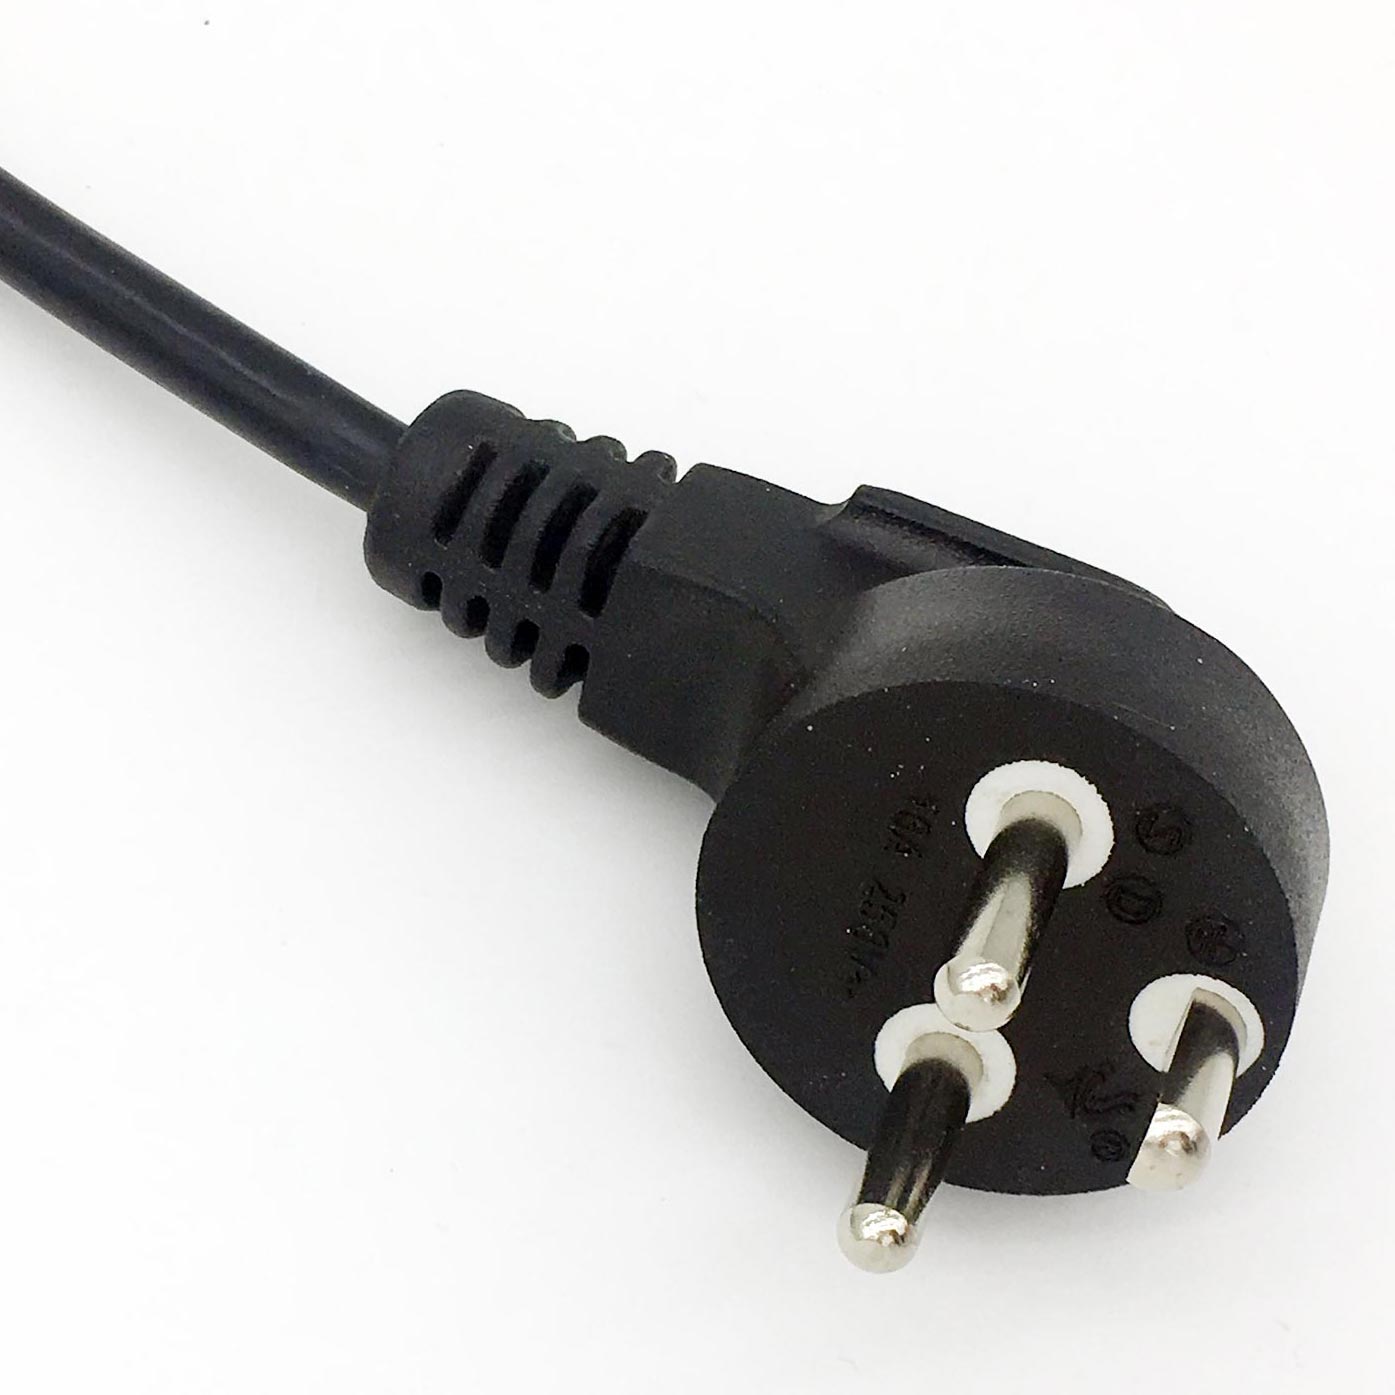 Denmark Power Cord (DEMKO Power Cords), AC Power Cable Amp 250 Volt AC, 2 Pole 3 Wire Grounding, Type K Right Angle Plug